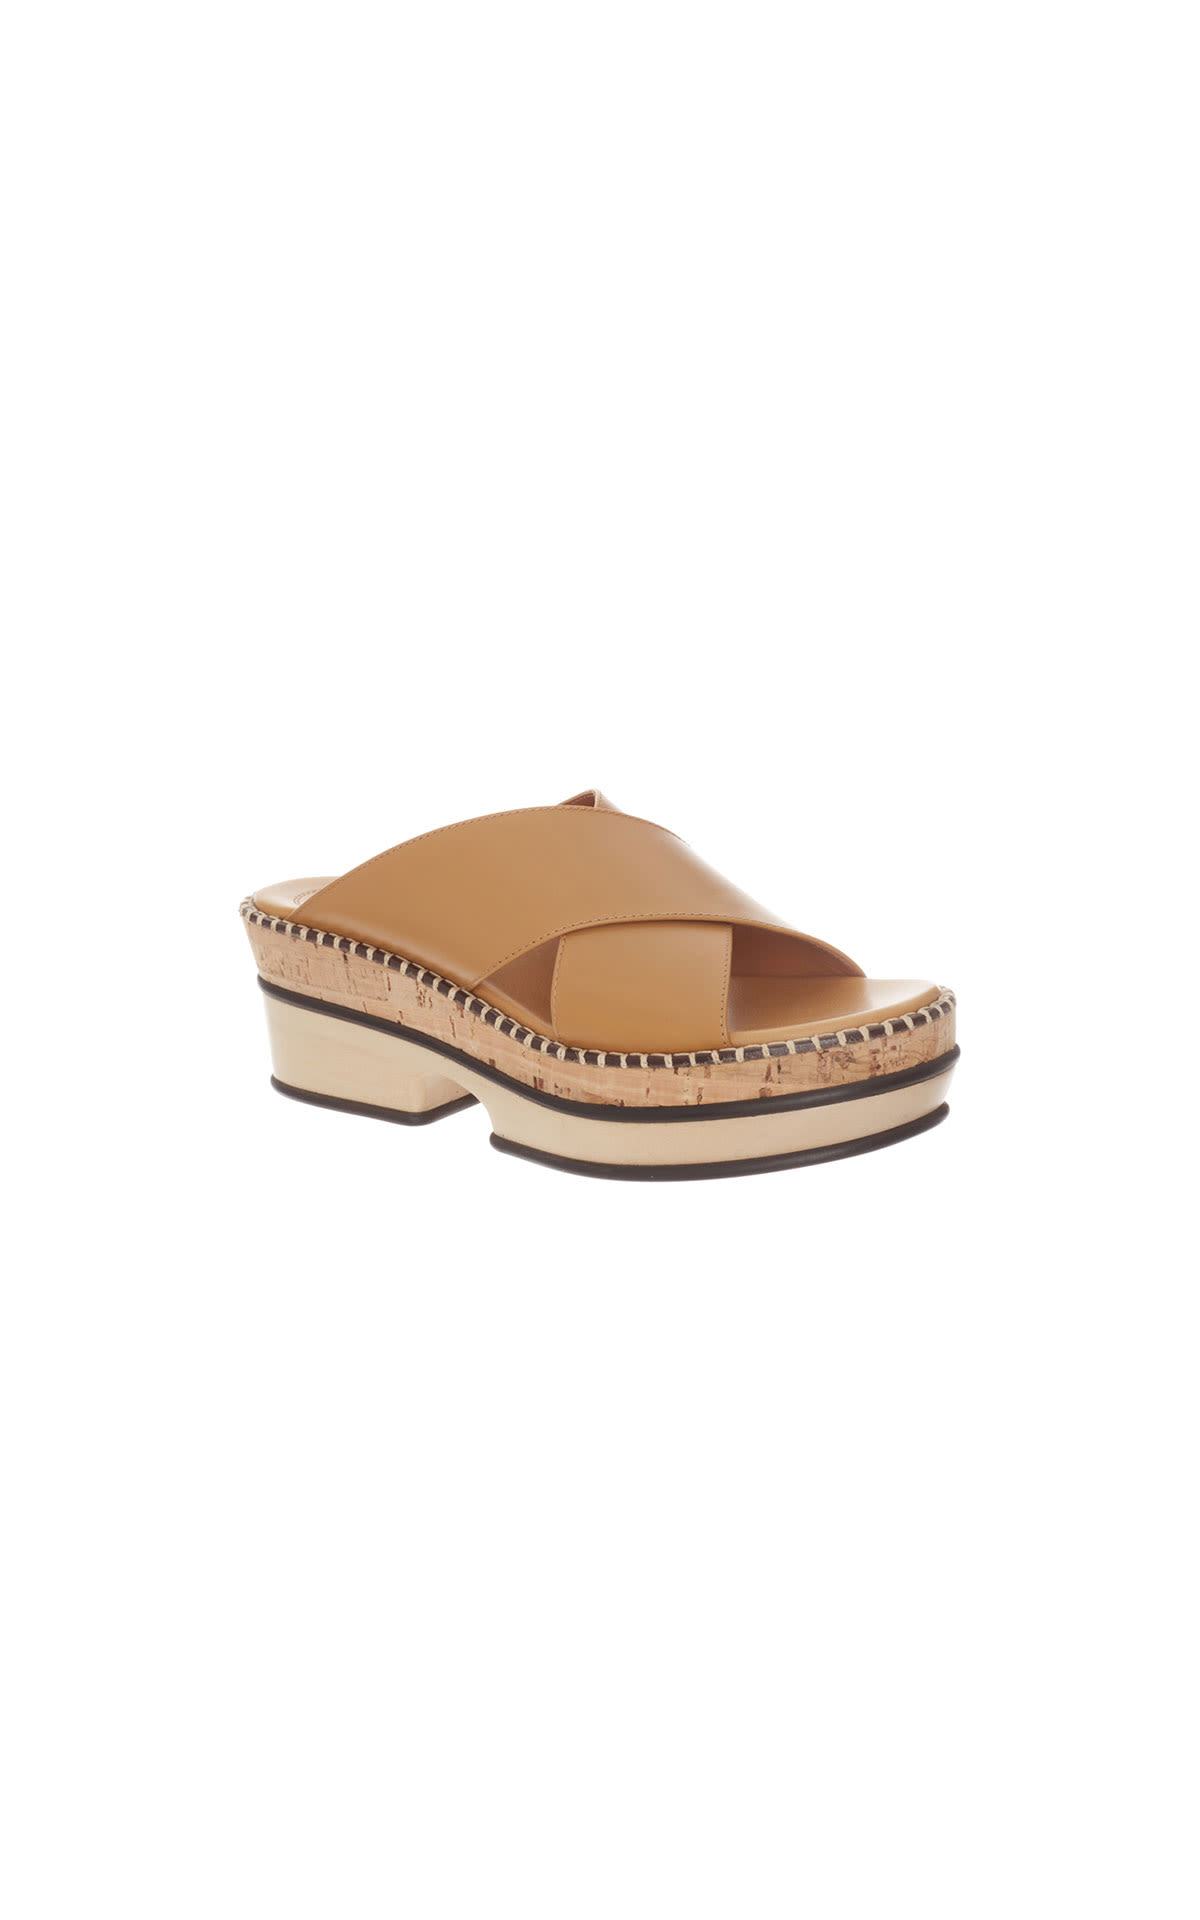 Chloe Stitched detail sandals from Bicester Village